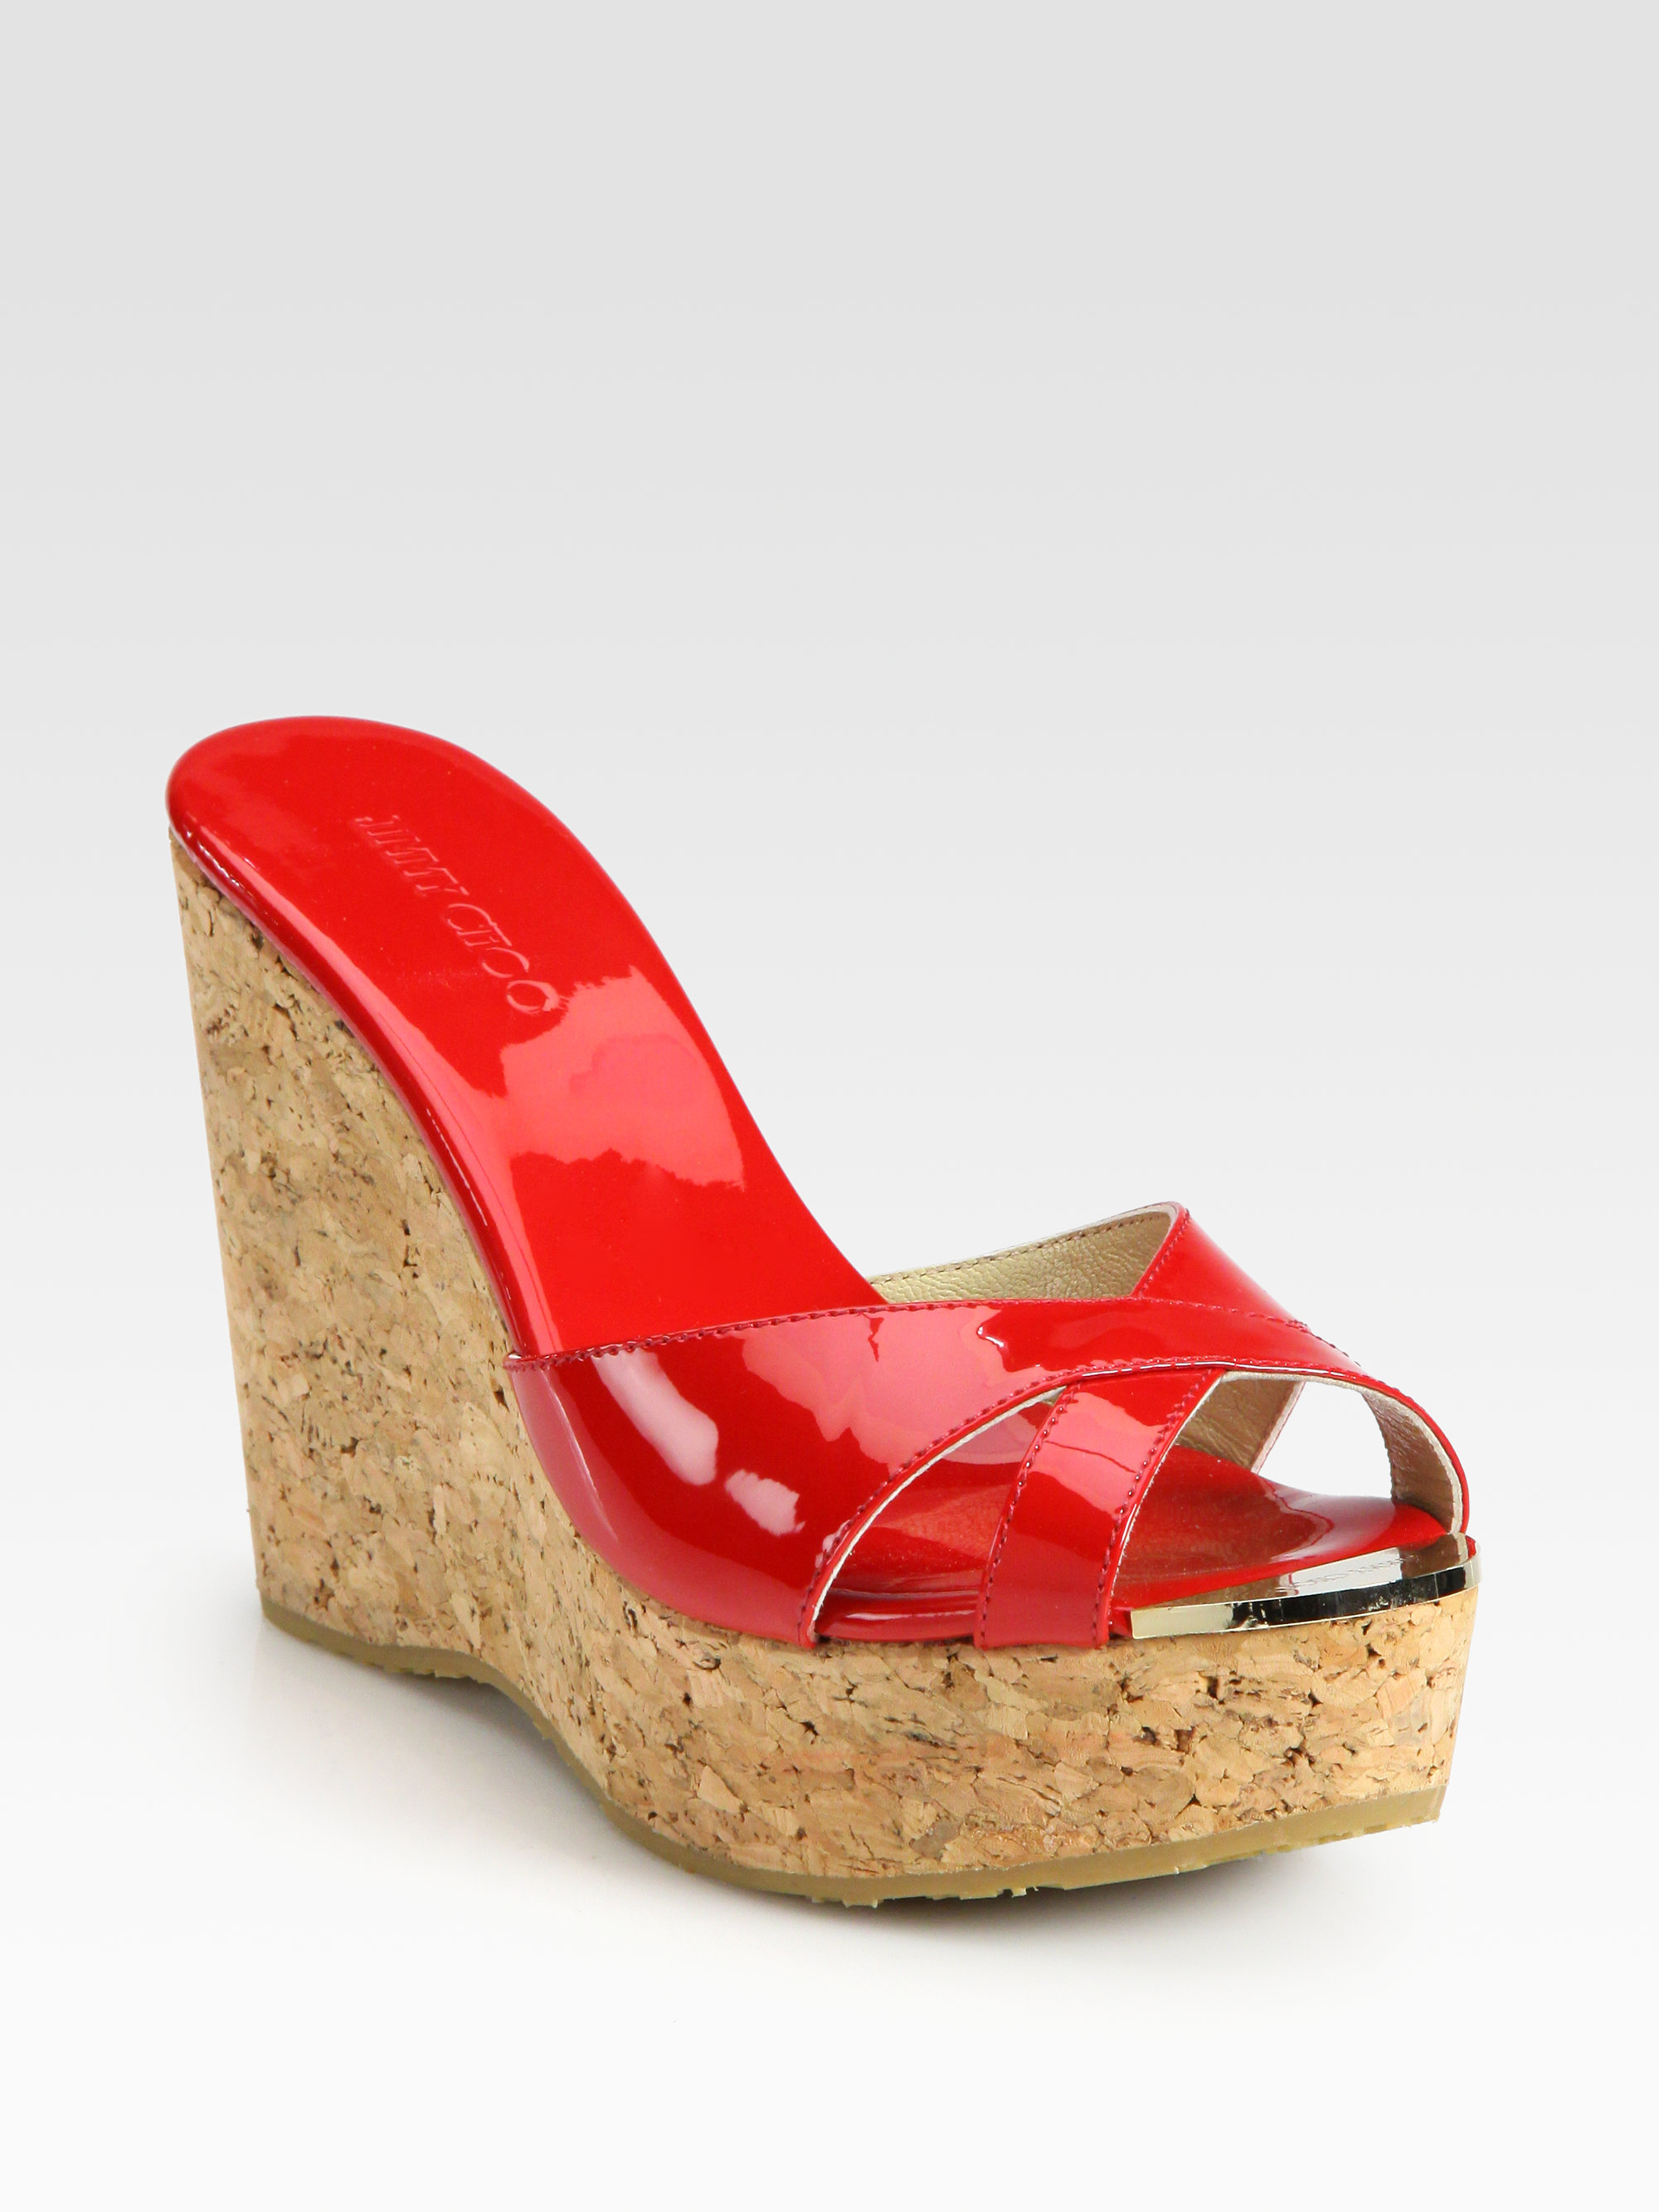 Jimmy Choo Perfume Patent Leather And Cork Wedge Sandals in Red | Lyst